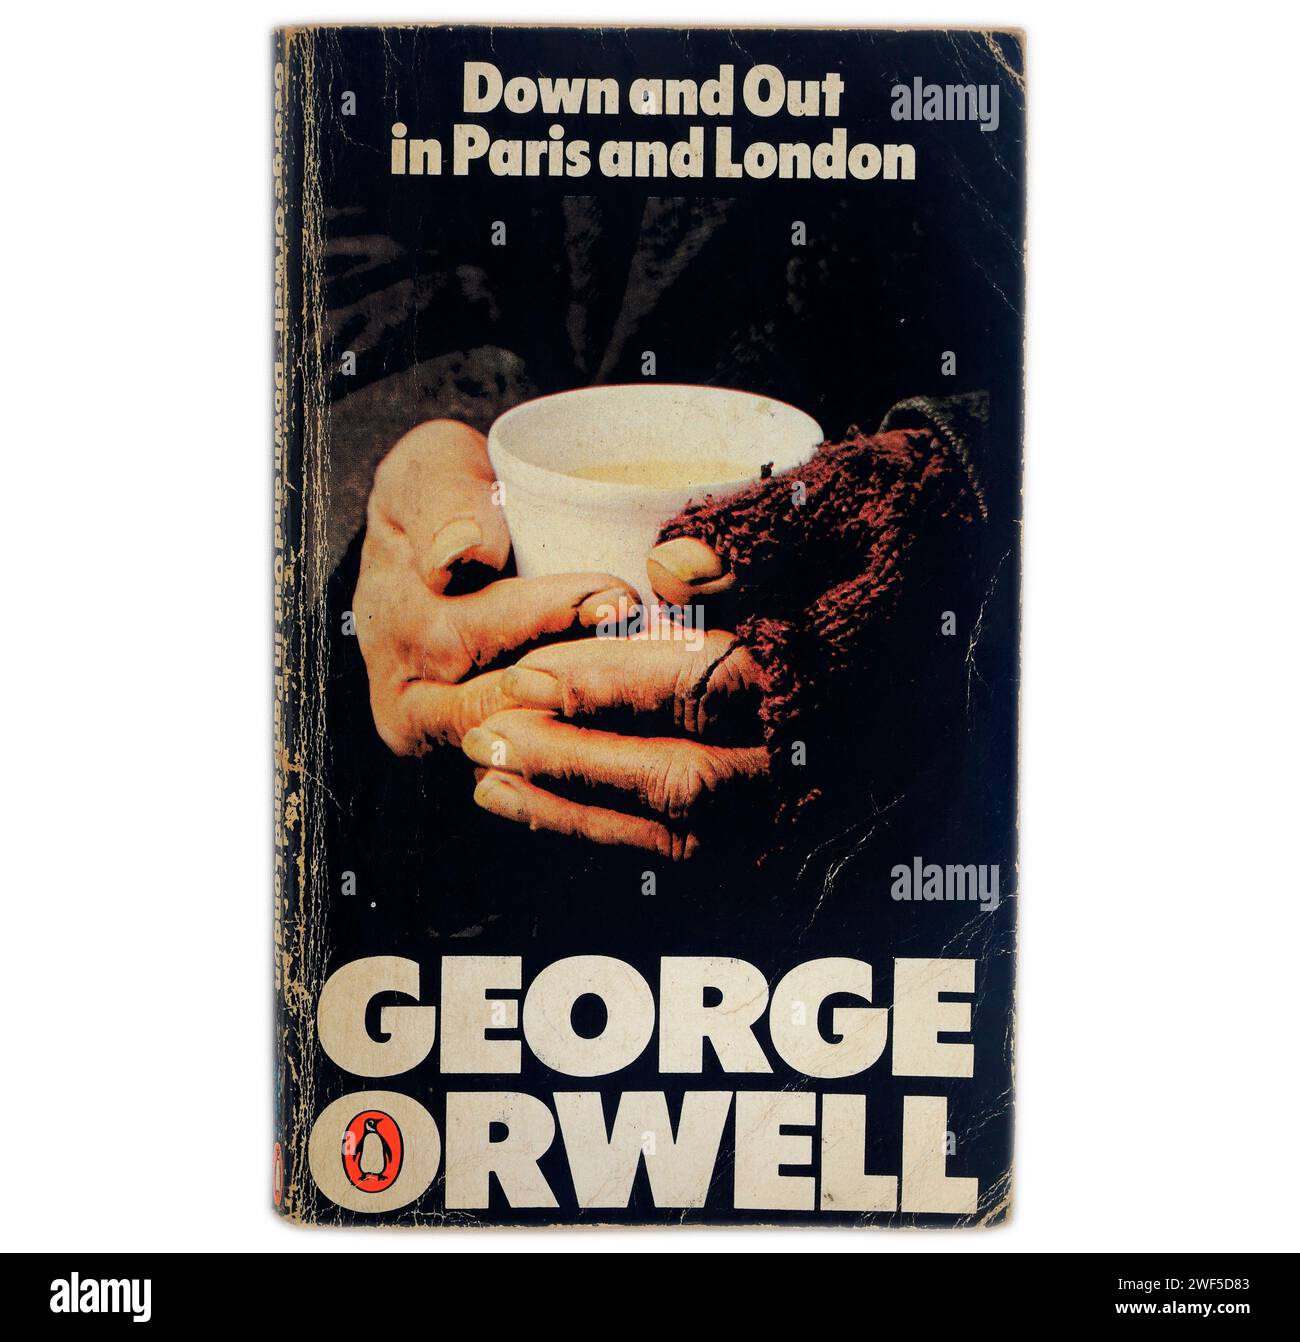 Down And Out In Paris And London by George Orwell. Book cover on light / white background Stock Photo